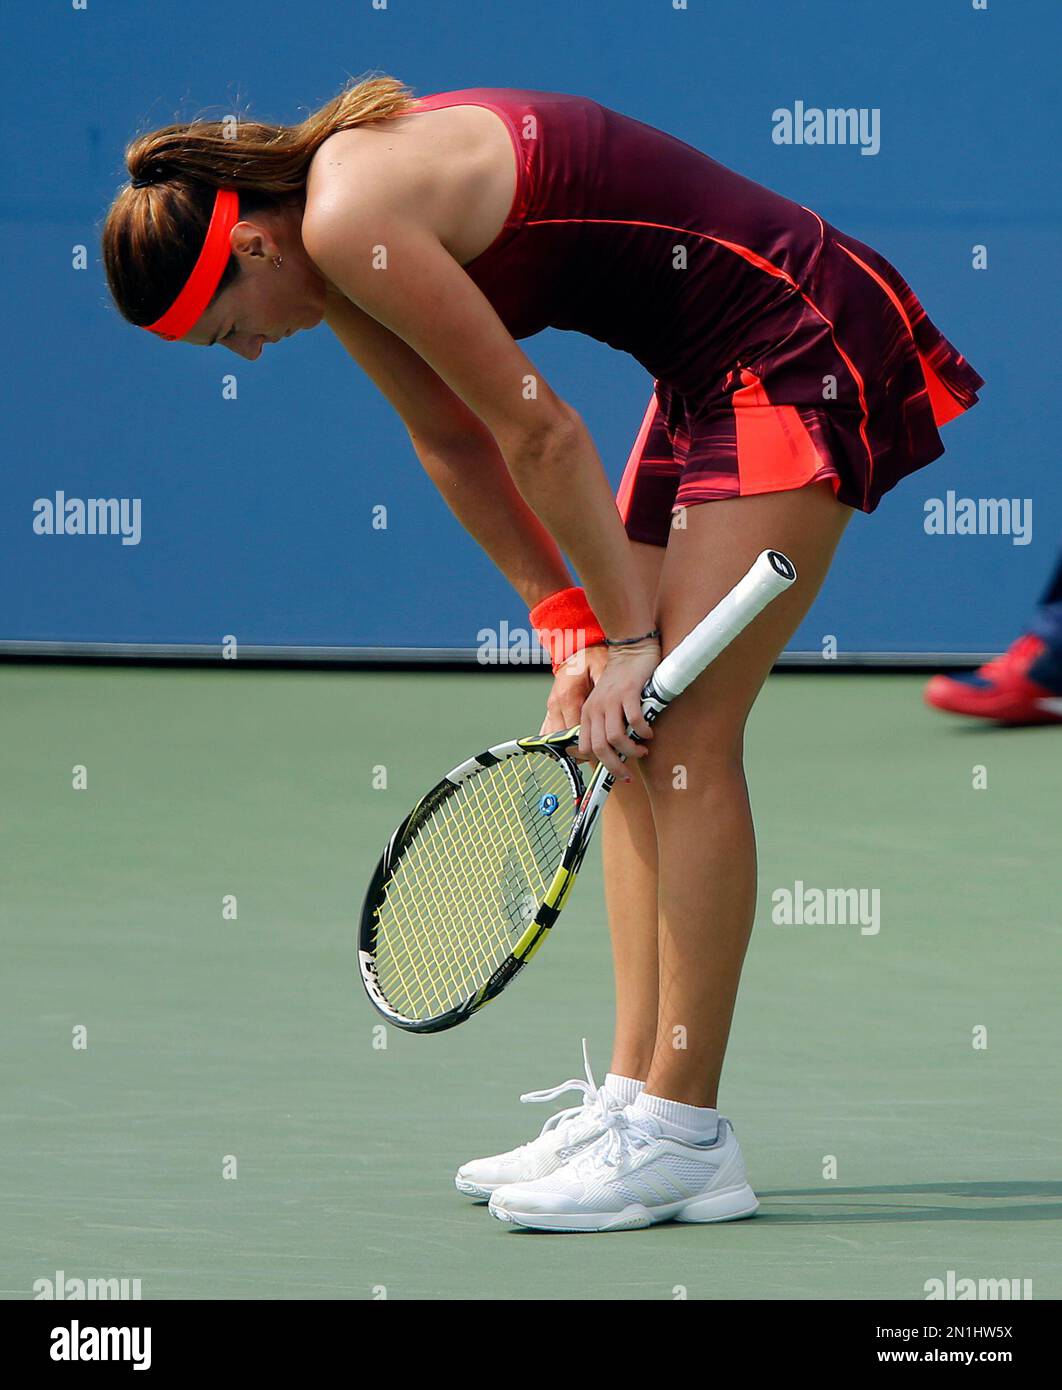 Mariana Duque-Marino, of Colombia, reacts after losing a point to Roberta  Vinci, of Italy, during the third round of the U.S. Open tennis tournament,  Friday, Sept. 4, 2015, in New York. (AP